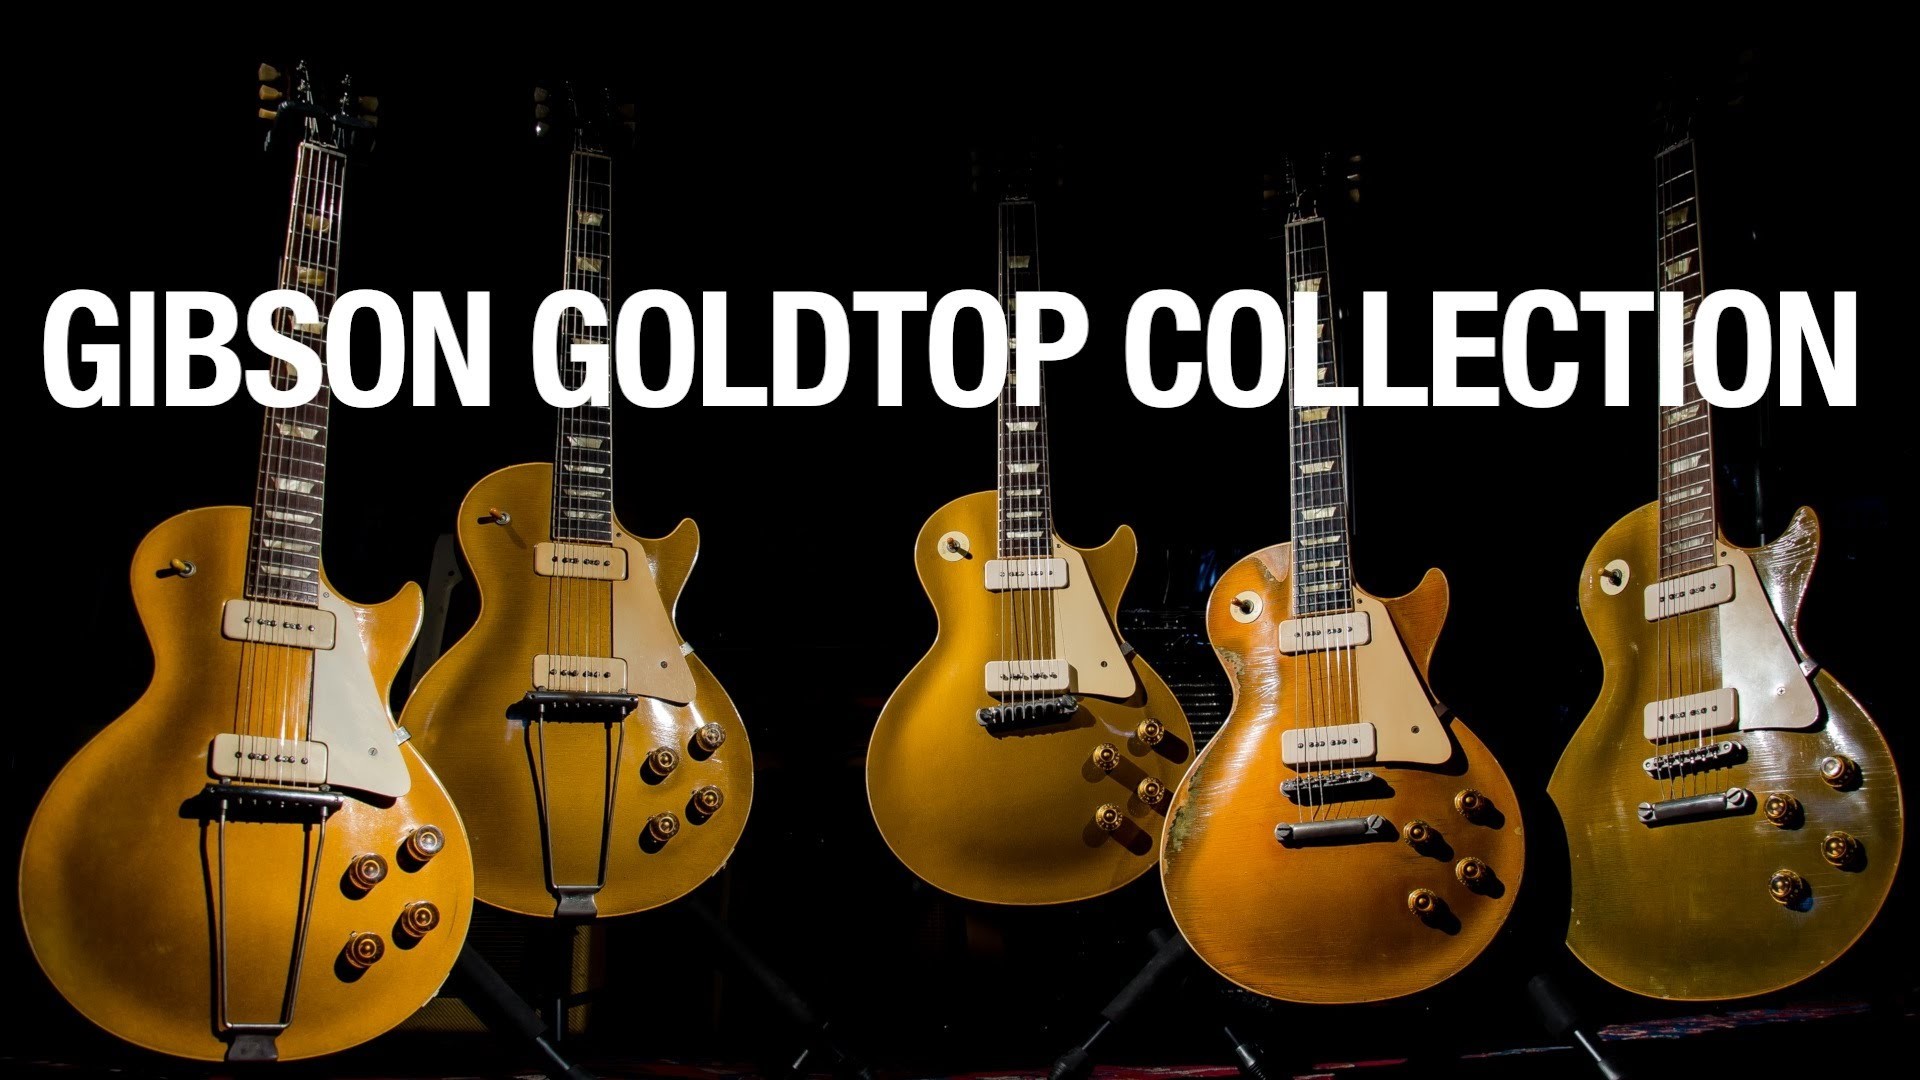 1920x1080 The Gibson Goldtop Collection (The Evolution of the Les Paul) - YouTube